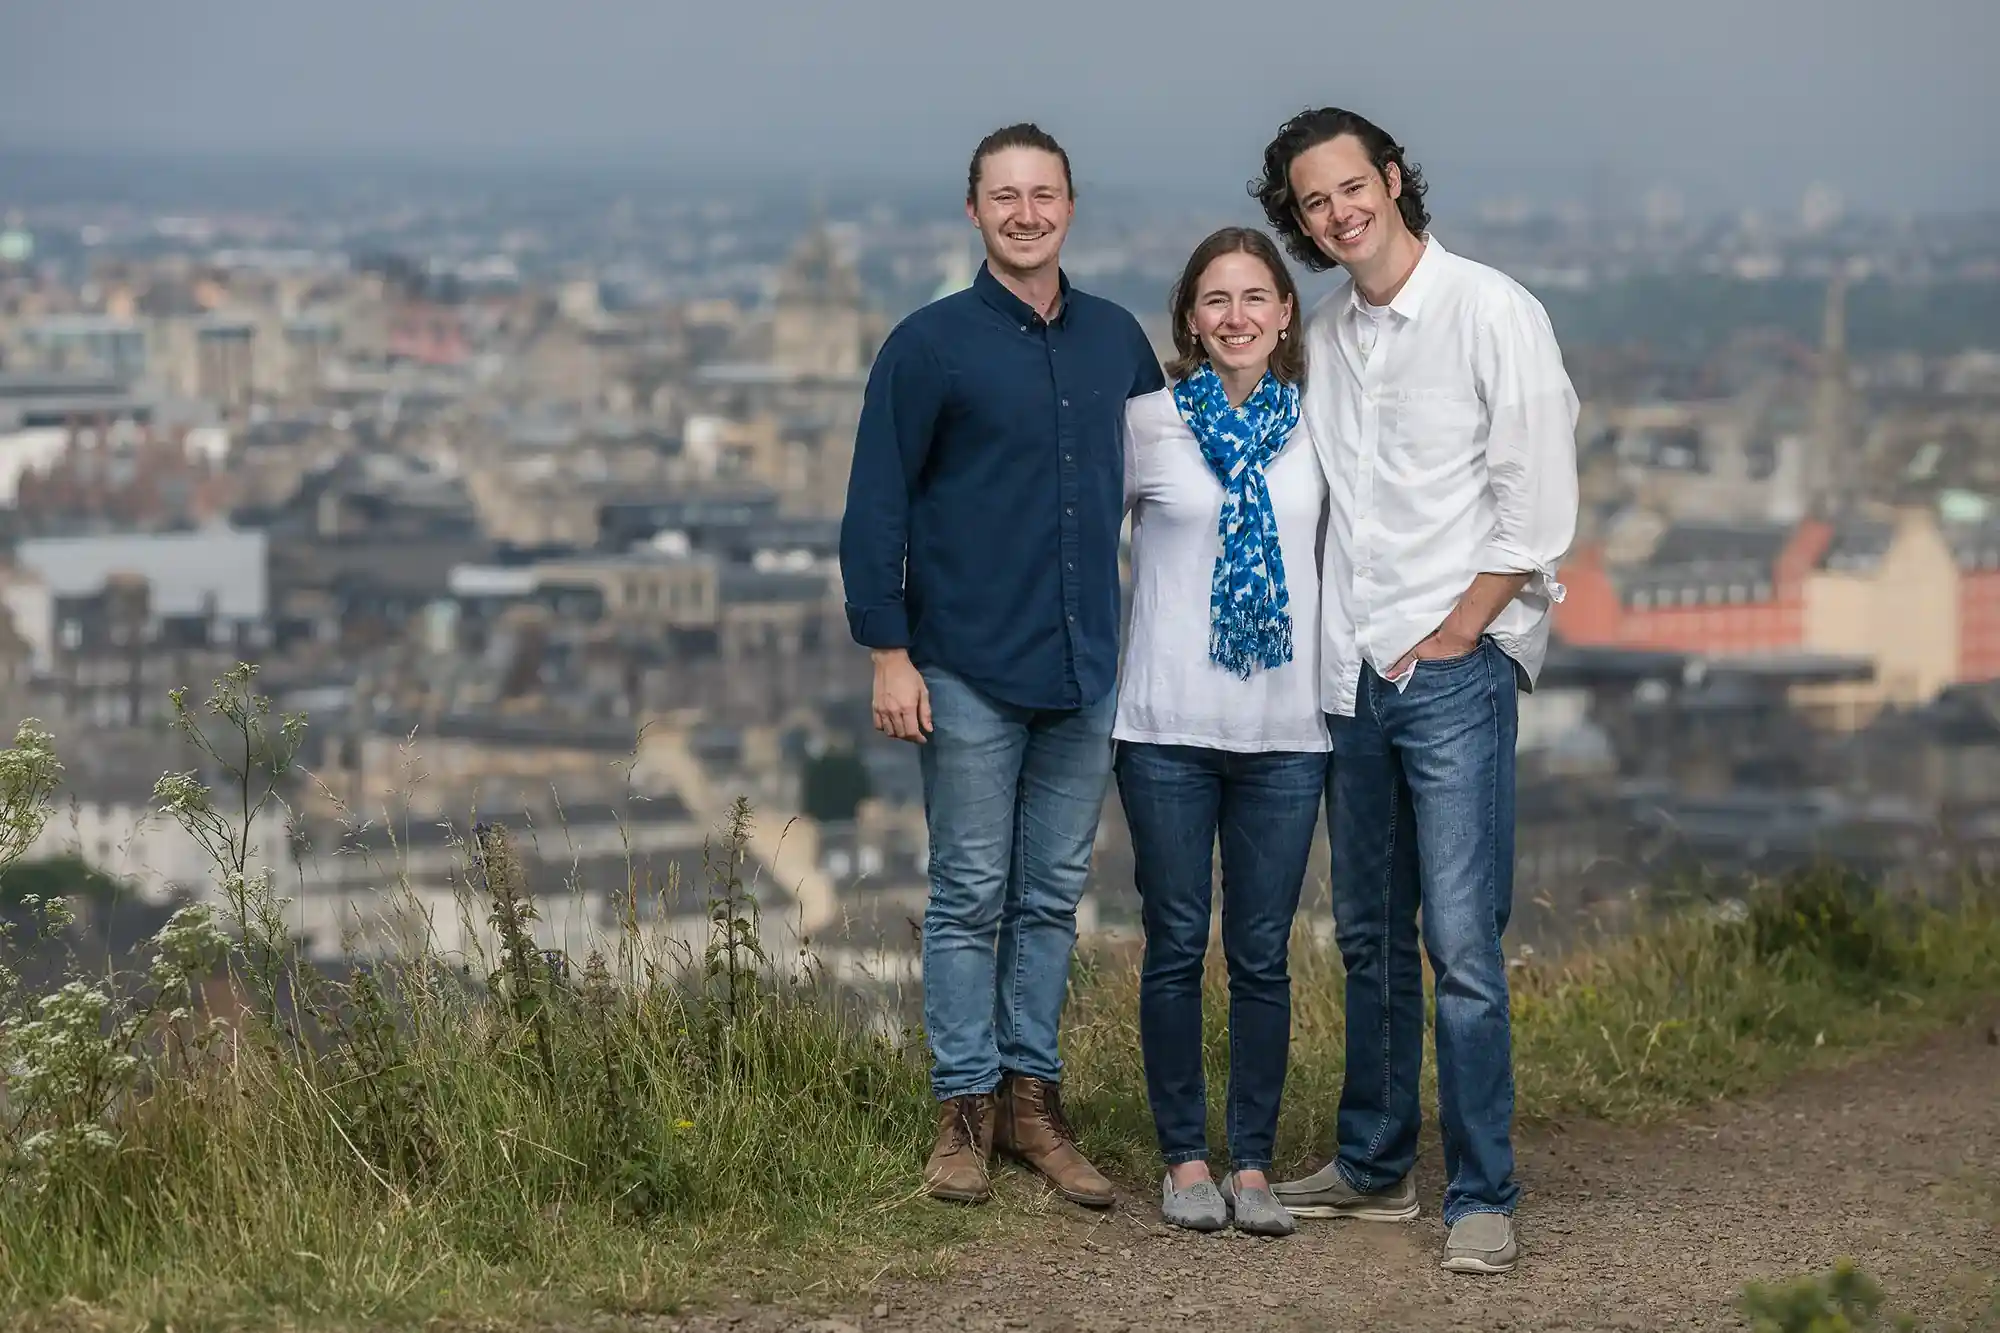 Three people stand smiling on a hilltop with a cityscape in the background. Two men and a woman, all casually dressed, pose together on a slightly overcast day.